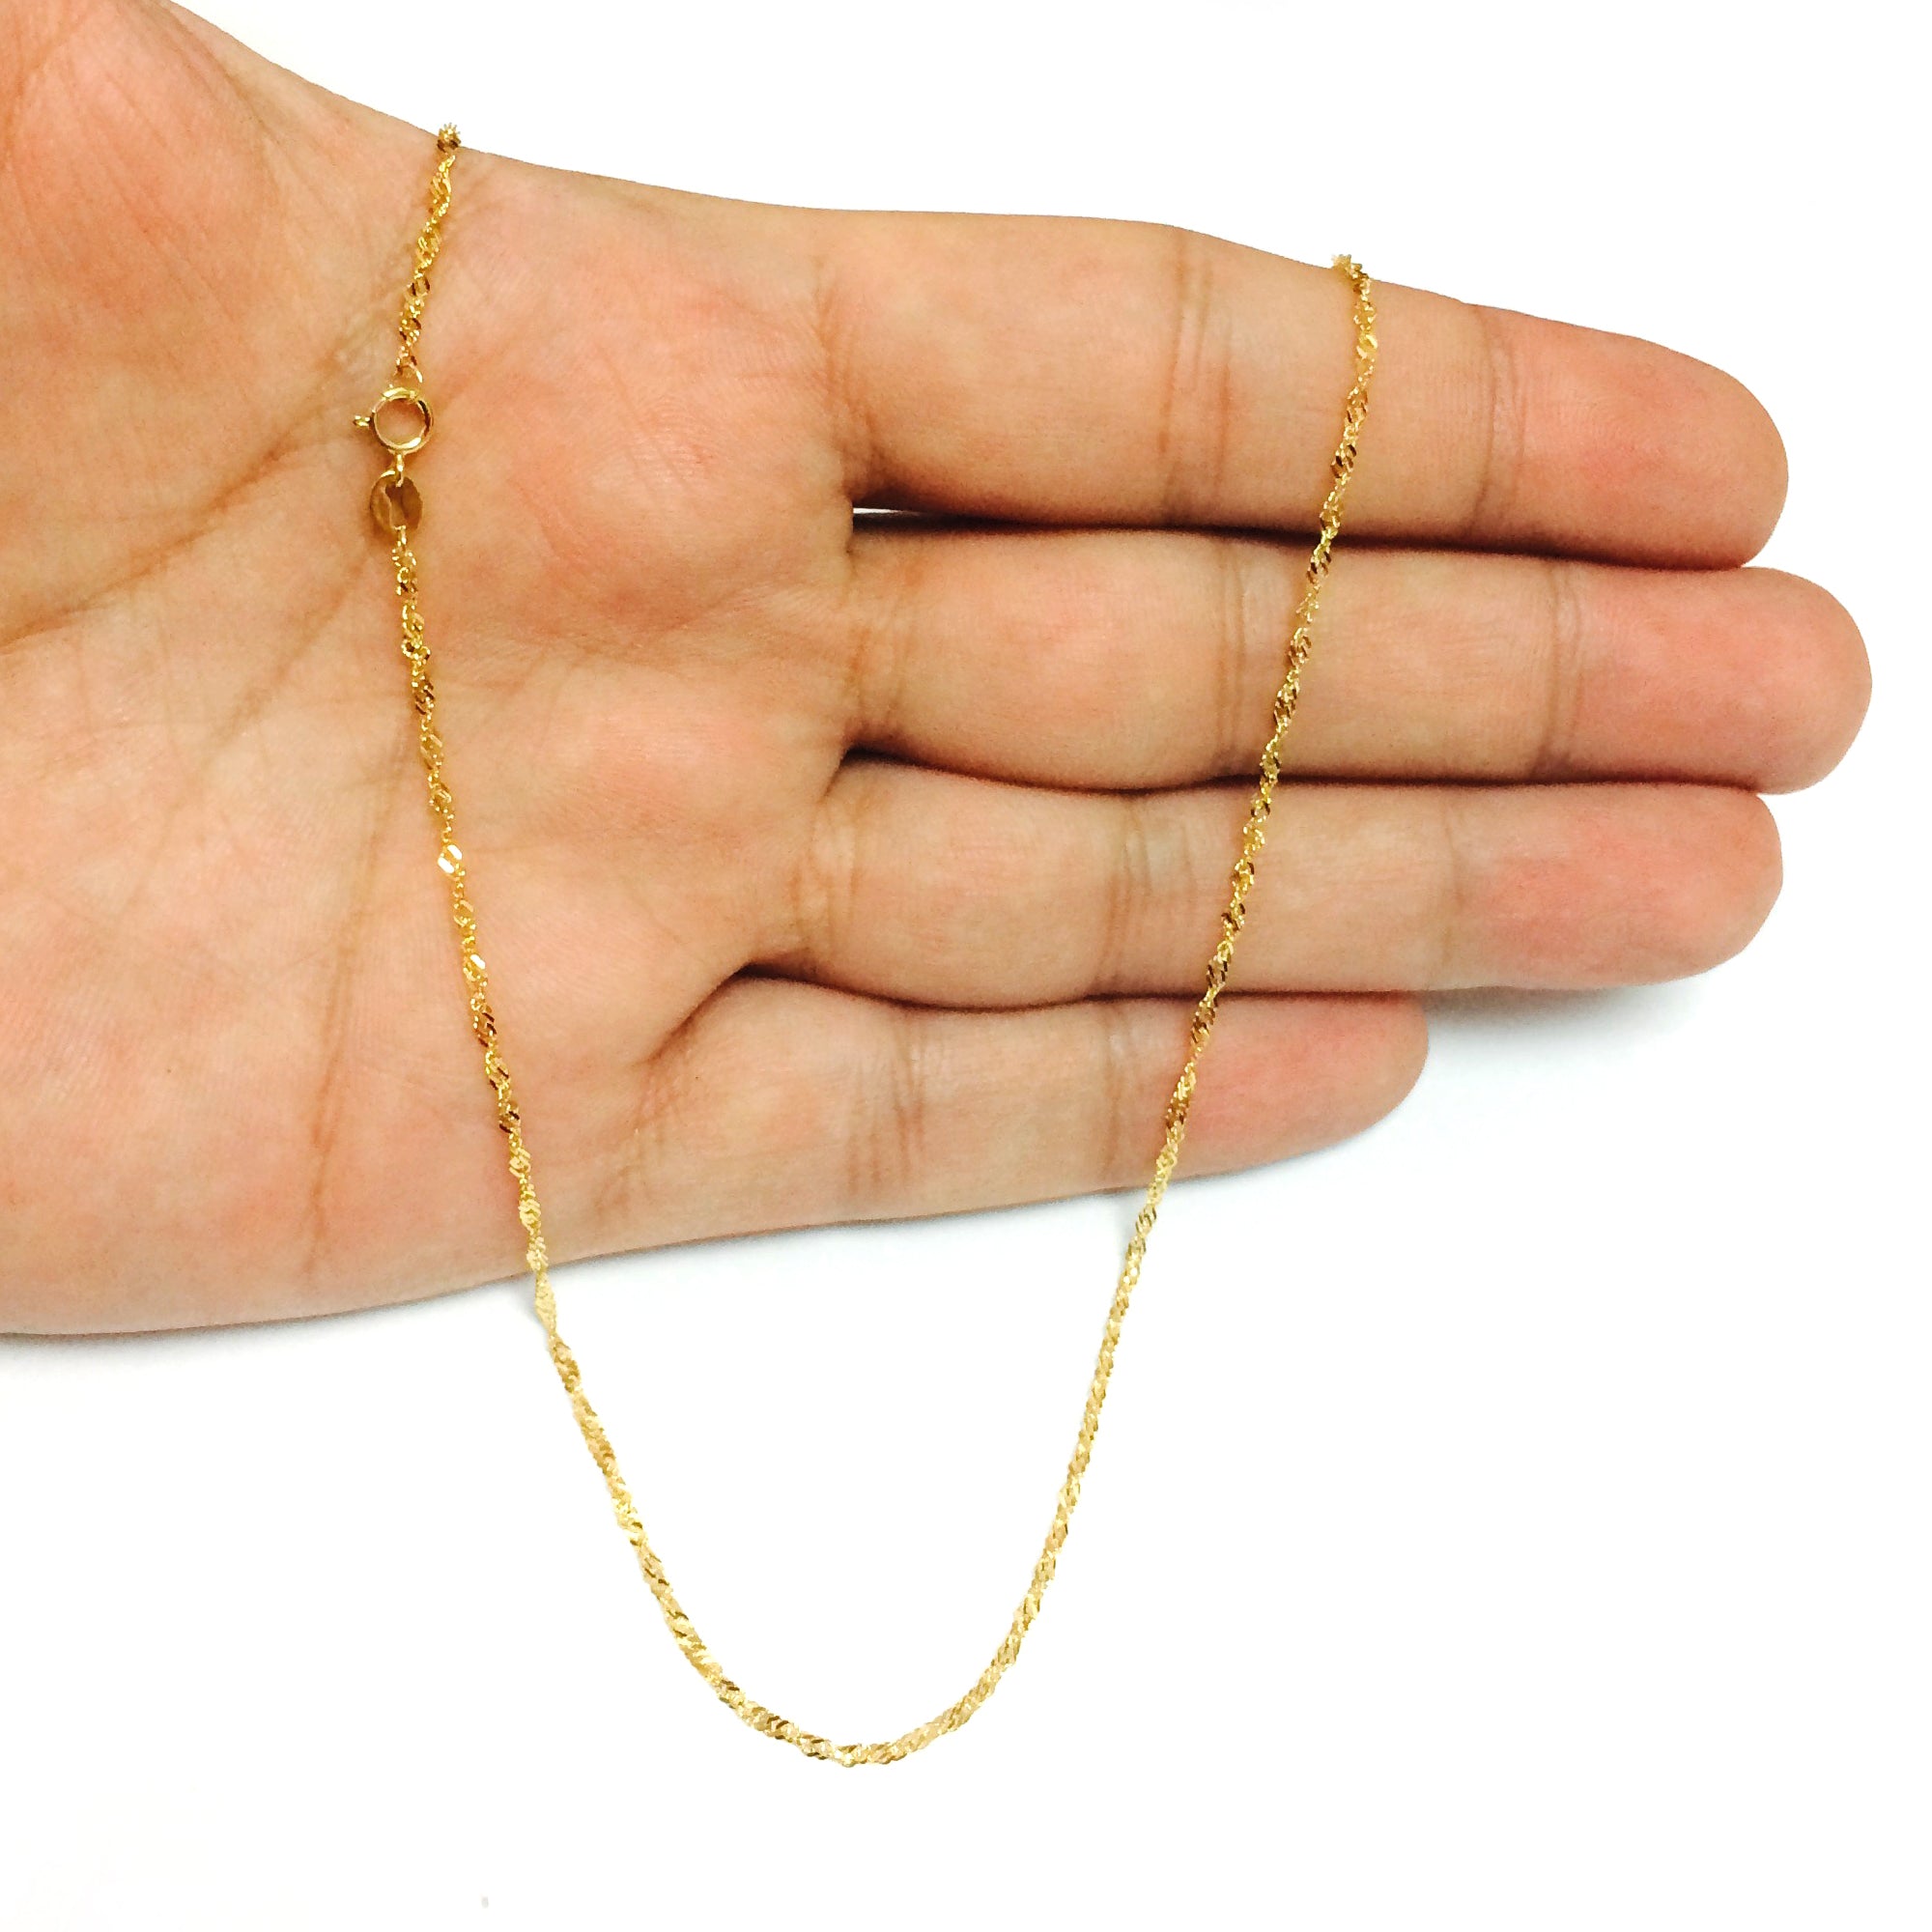 10k Yellow Gold Singapore Chain Necklace, 1.5mm fine designer jewelry for men and women